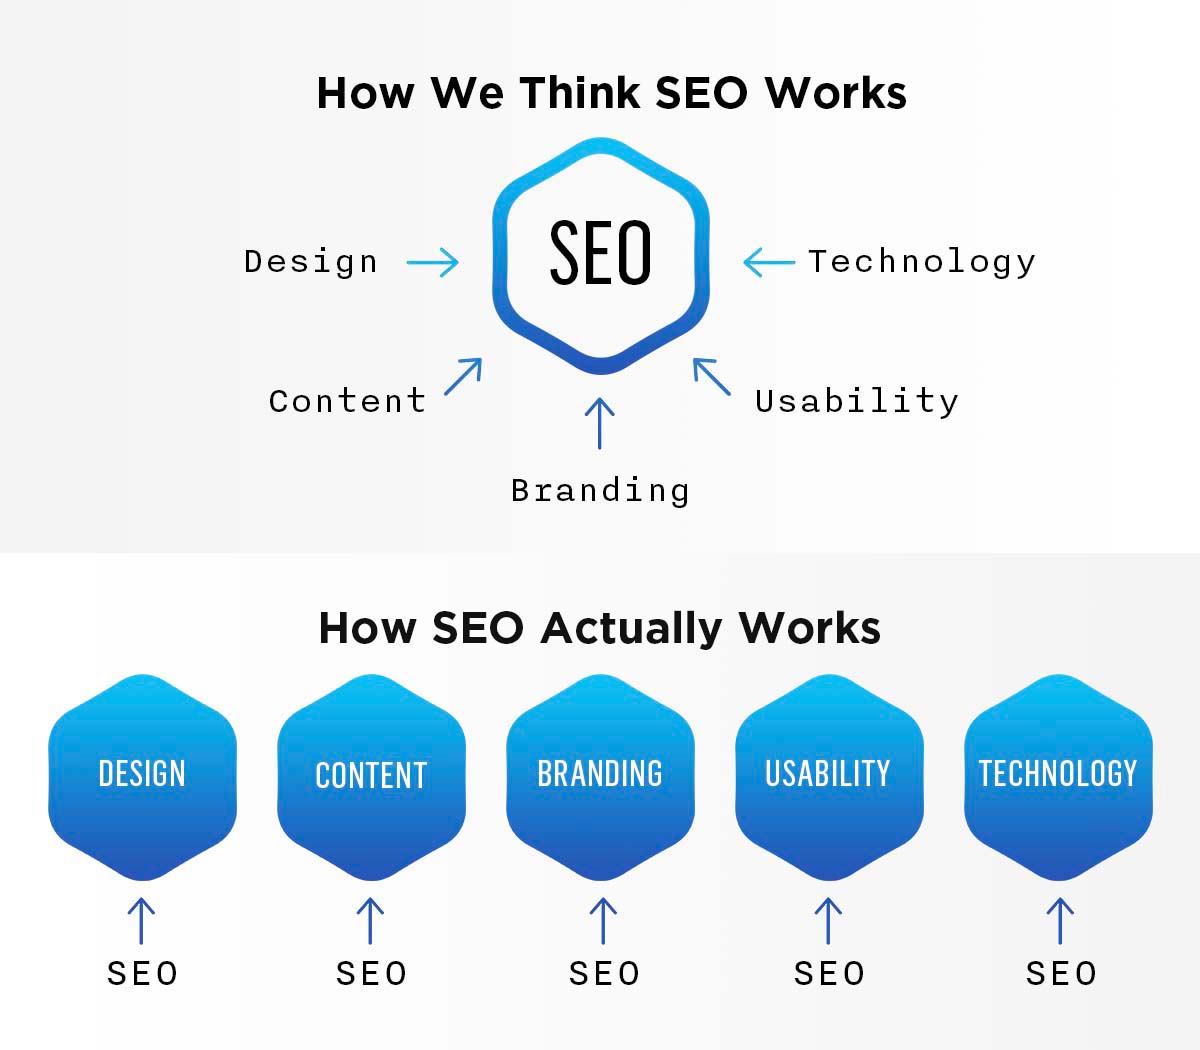 Graph of how we think SEO works versus how SEO actually works